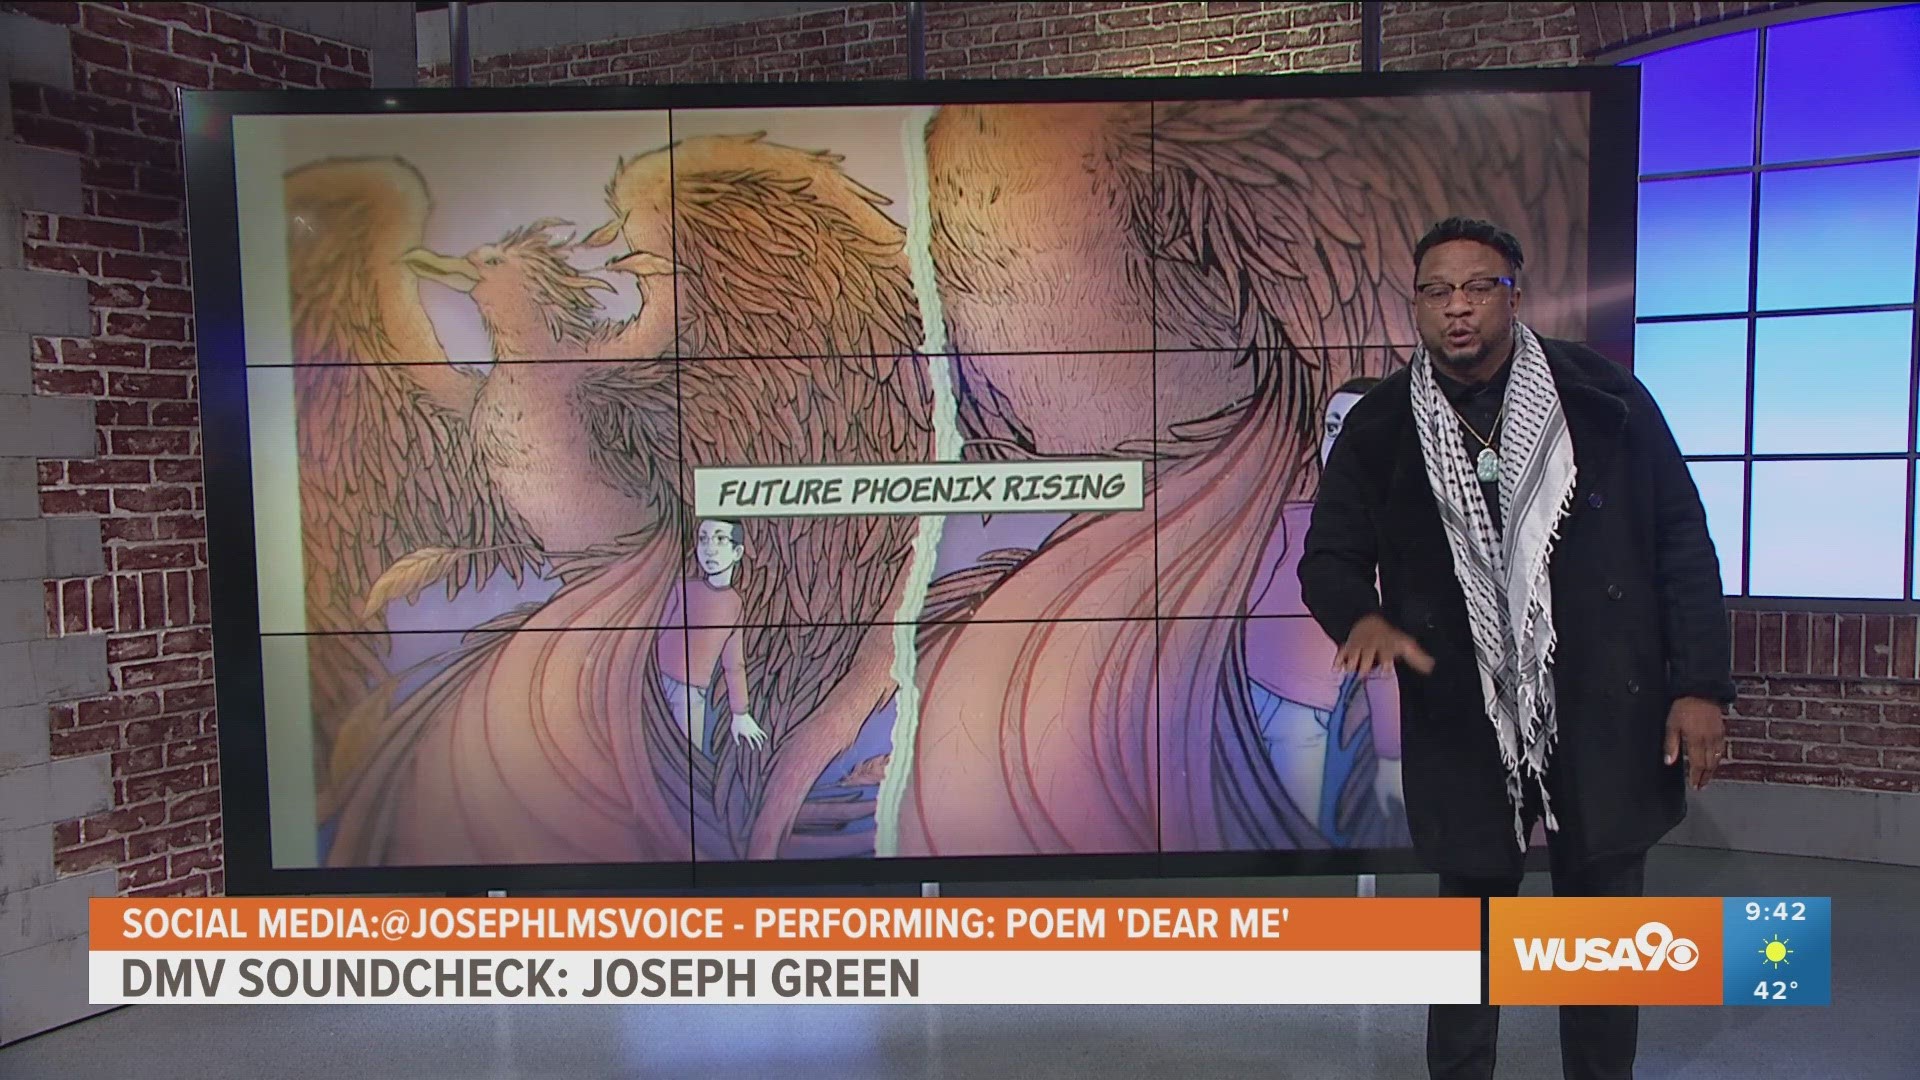 Motivational speaker & spoken word artist Joseph Green releases his first book, a graphic novel dealing with substance use disorder, mental health, & healing.